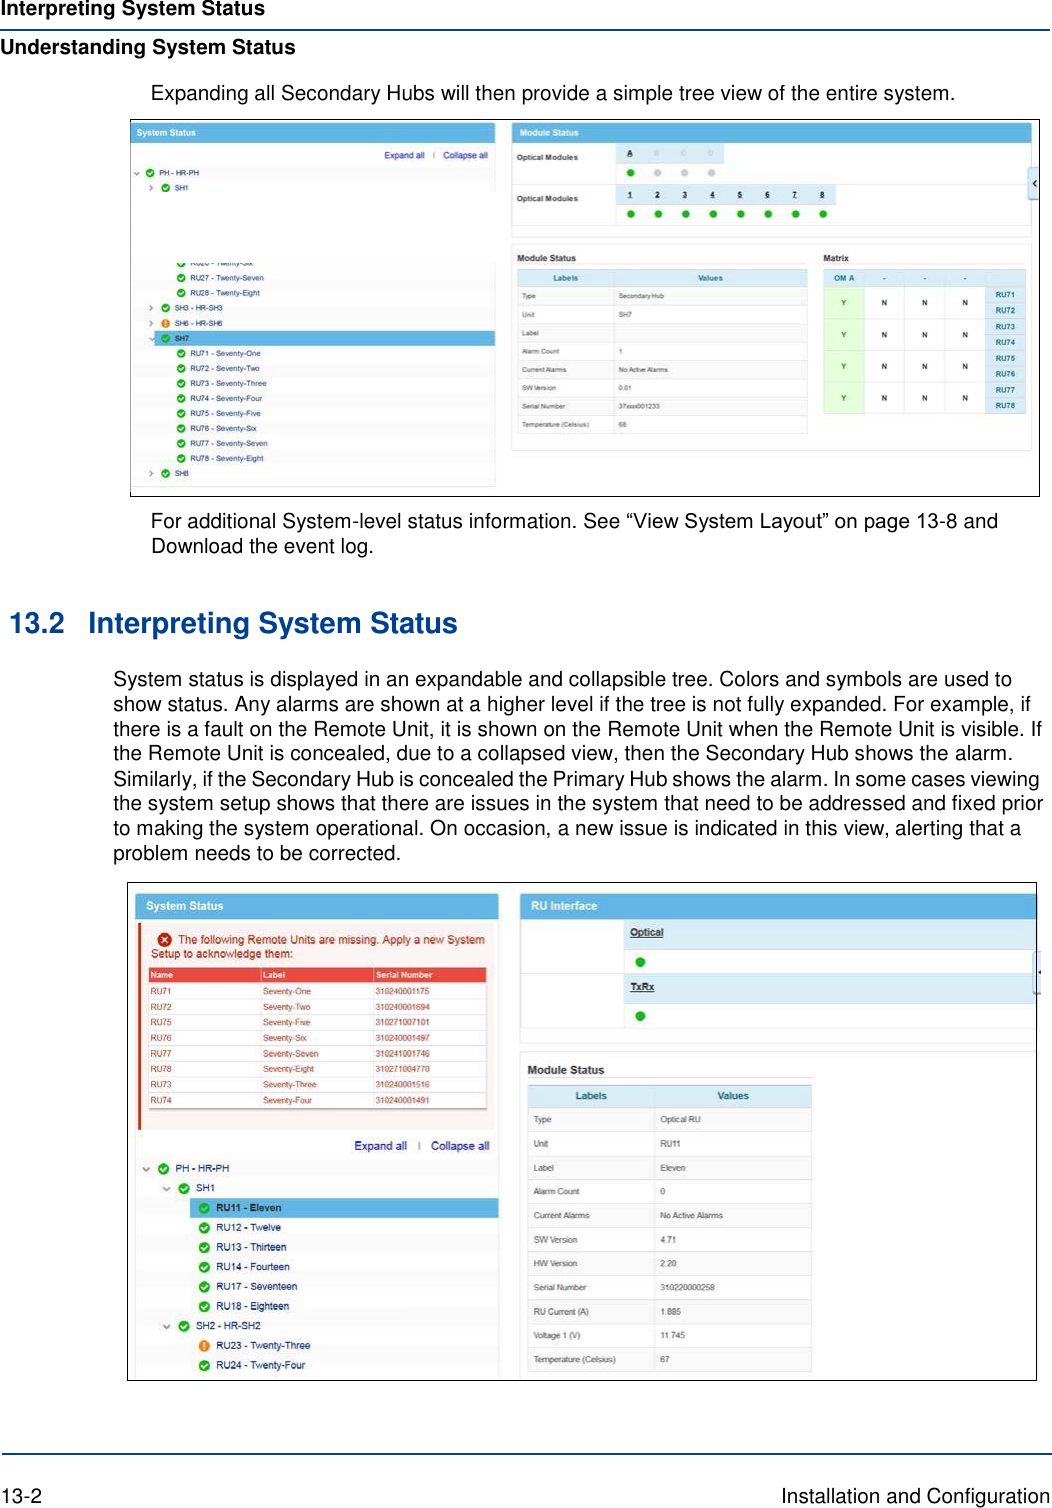 Interpreting System Status Understanding System Status Expanding all Secondary Hubs will then provide a simple tree view of the entire system.    For additional System-level status information. See “View System Layout” on page 13-8 and Download the event log.   13.2 Interpreting System Status System status is displayed in an expandable and collapsible tree. Colors and symbols are used to show status. Any alarms are shown at a higher level if the tree is not fully expanded. For example, if there is a fault on the Remote Unit, it is shown on the Remote Unit when the Remote Unit is visible. If the Remote Unit is concealed, due to a collapsed view, then the Secondary Hub shows the alarm. Similarly, if the Secondary Hub is concealed the Primary Hub shows the alarm. In some cases viewing the system setup shows that there are issues in the system that need to be addressed and fixed prior to making the system operational. On occasion, a new issue is indicated in this view, alerting that a problem needs to be corrected.      13-2  Installation and Configuration 